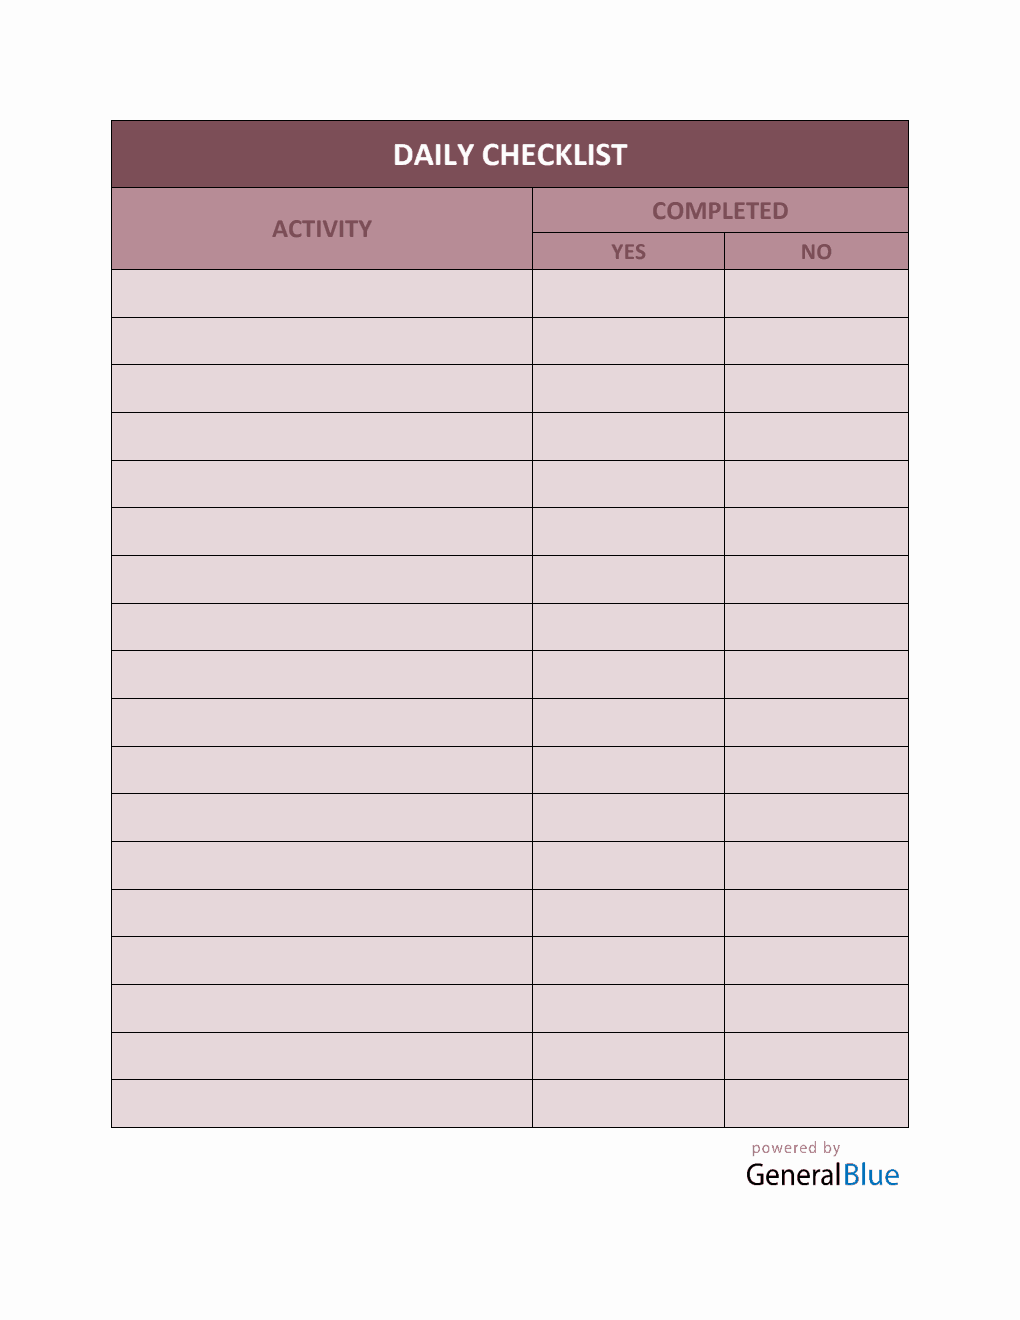 Daily Checklist Template in Word